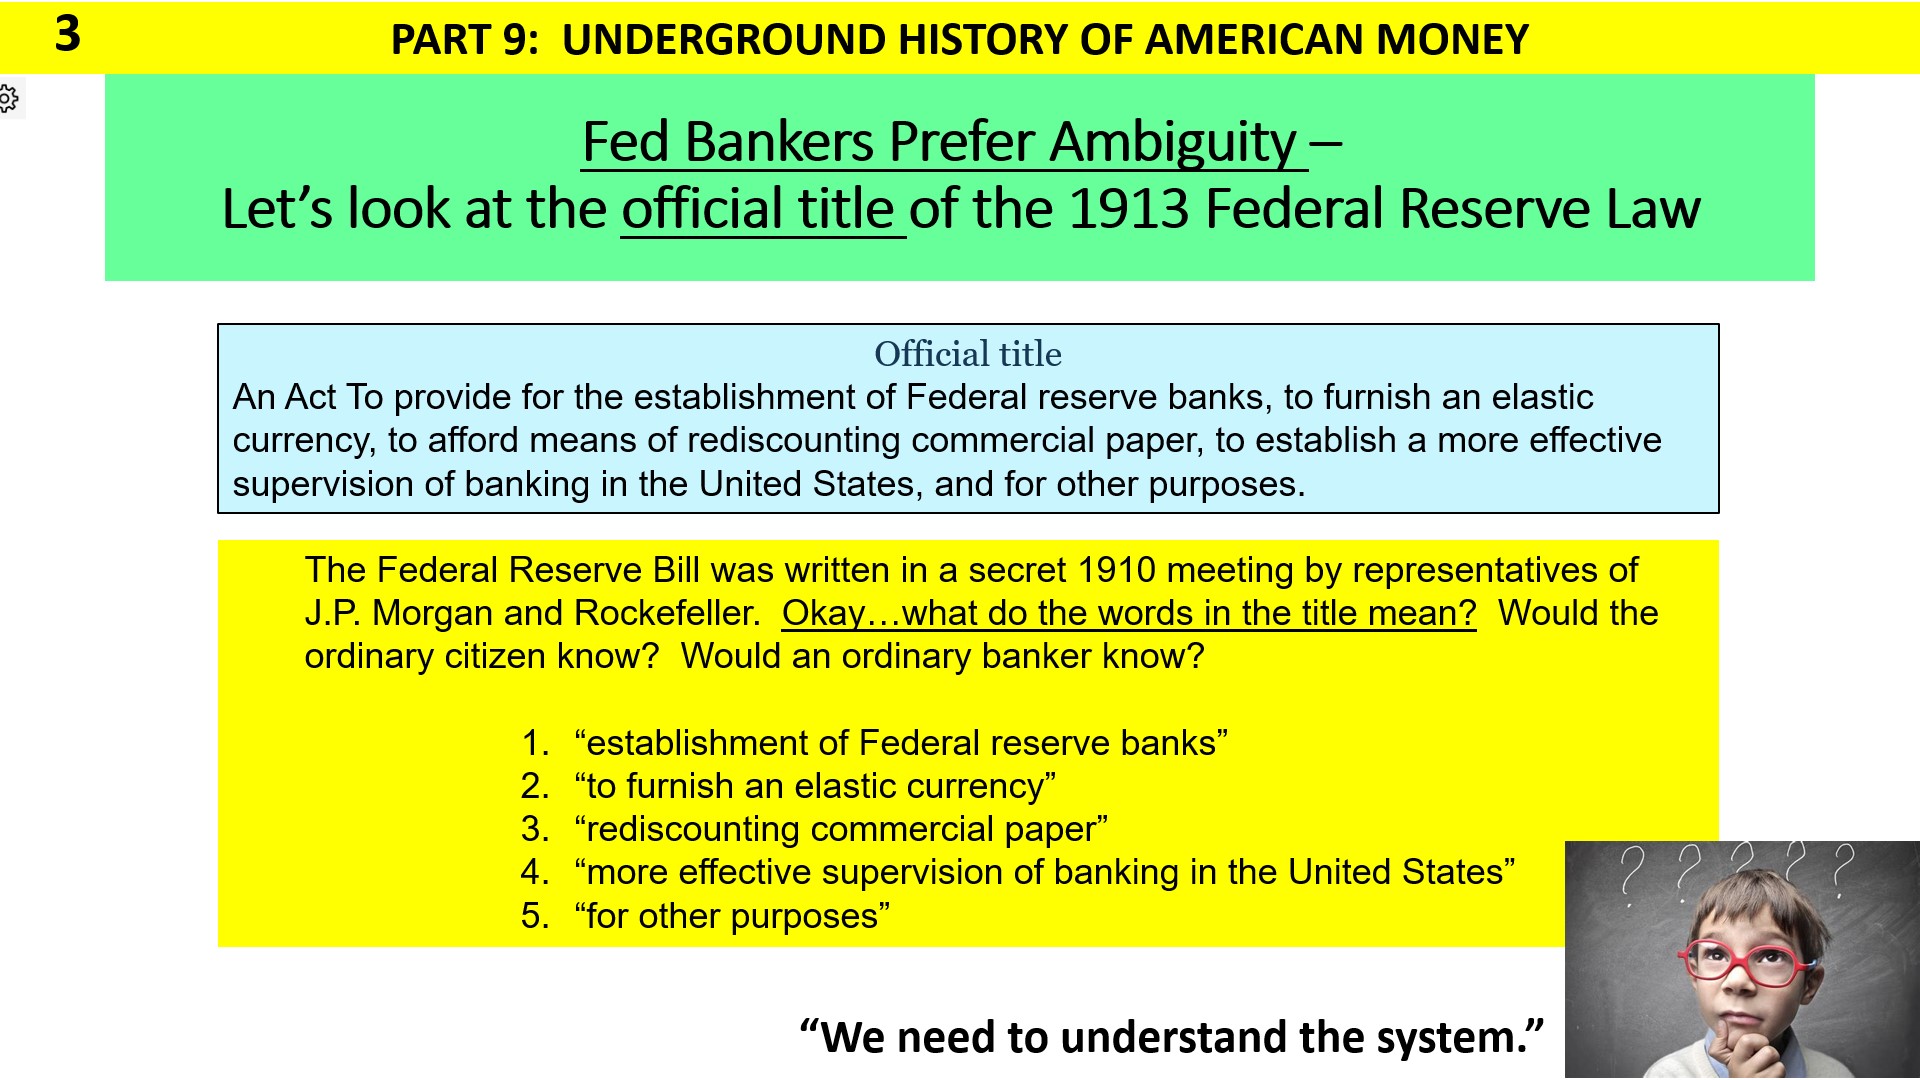 Official title of the Federal Reserve Act